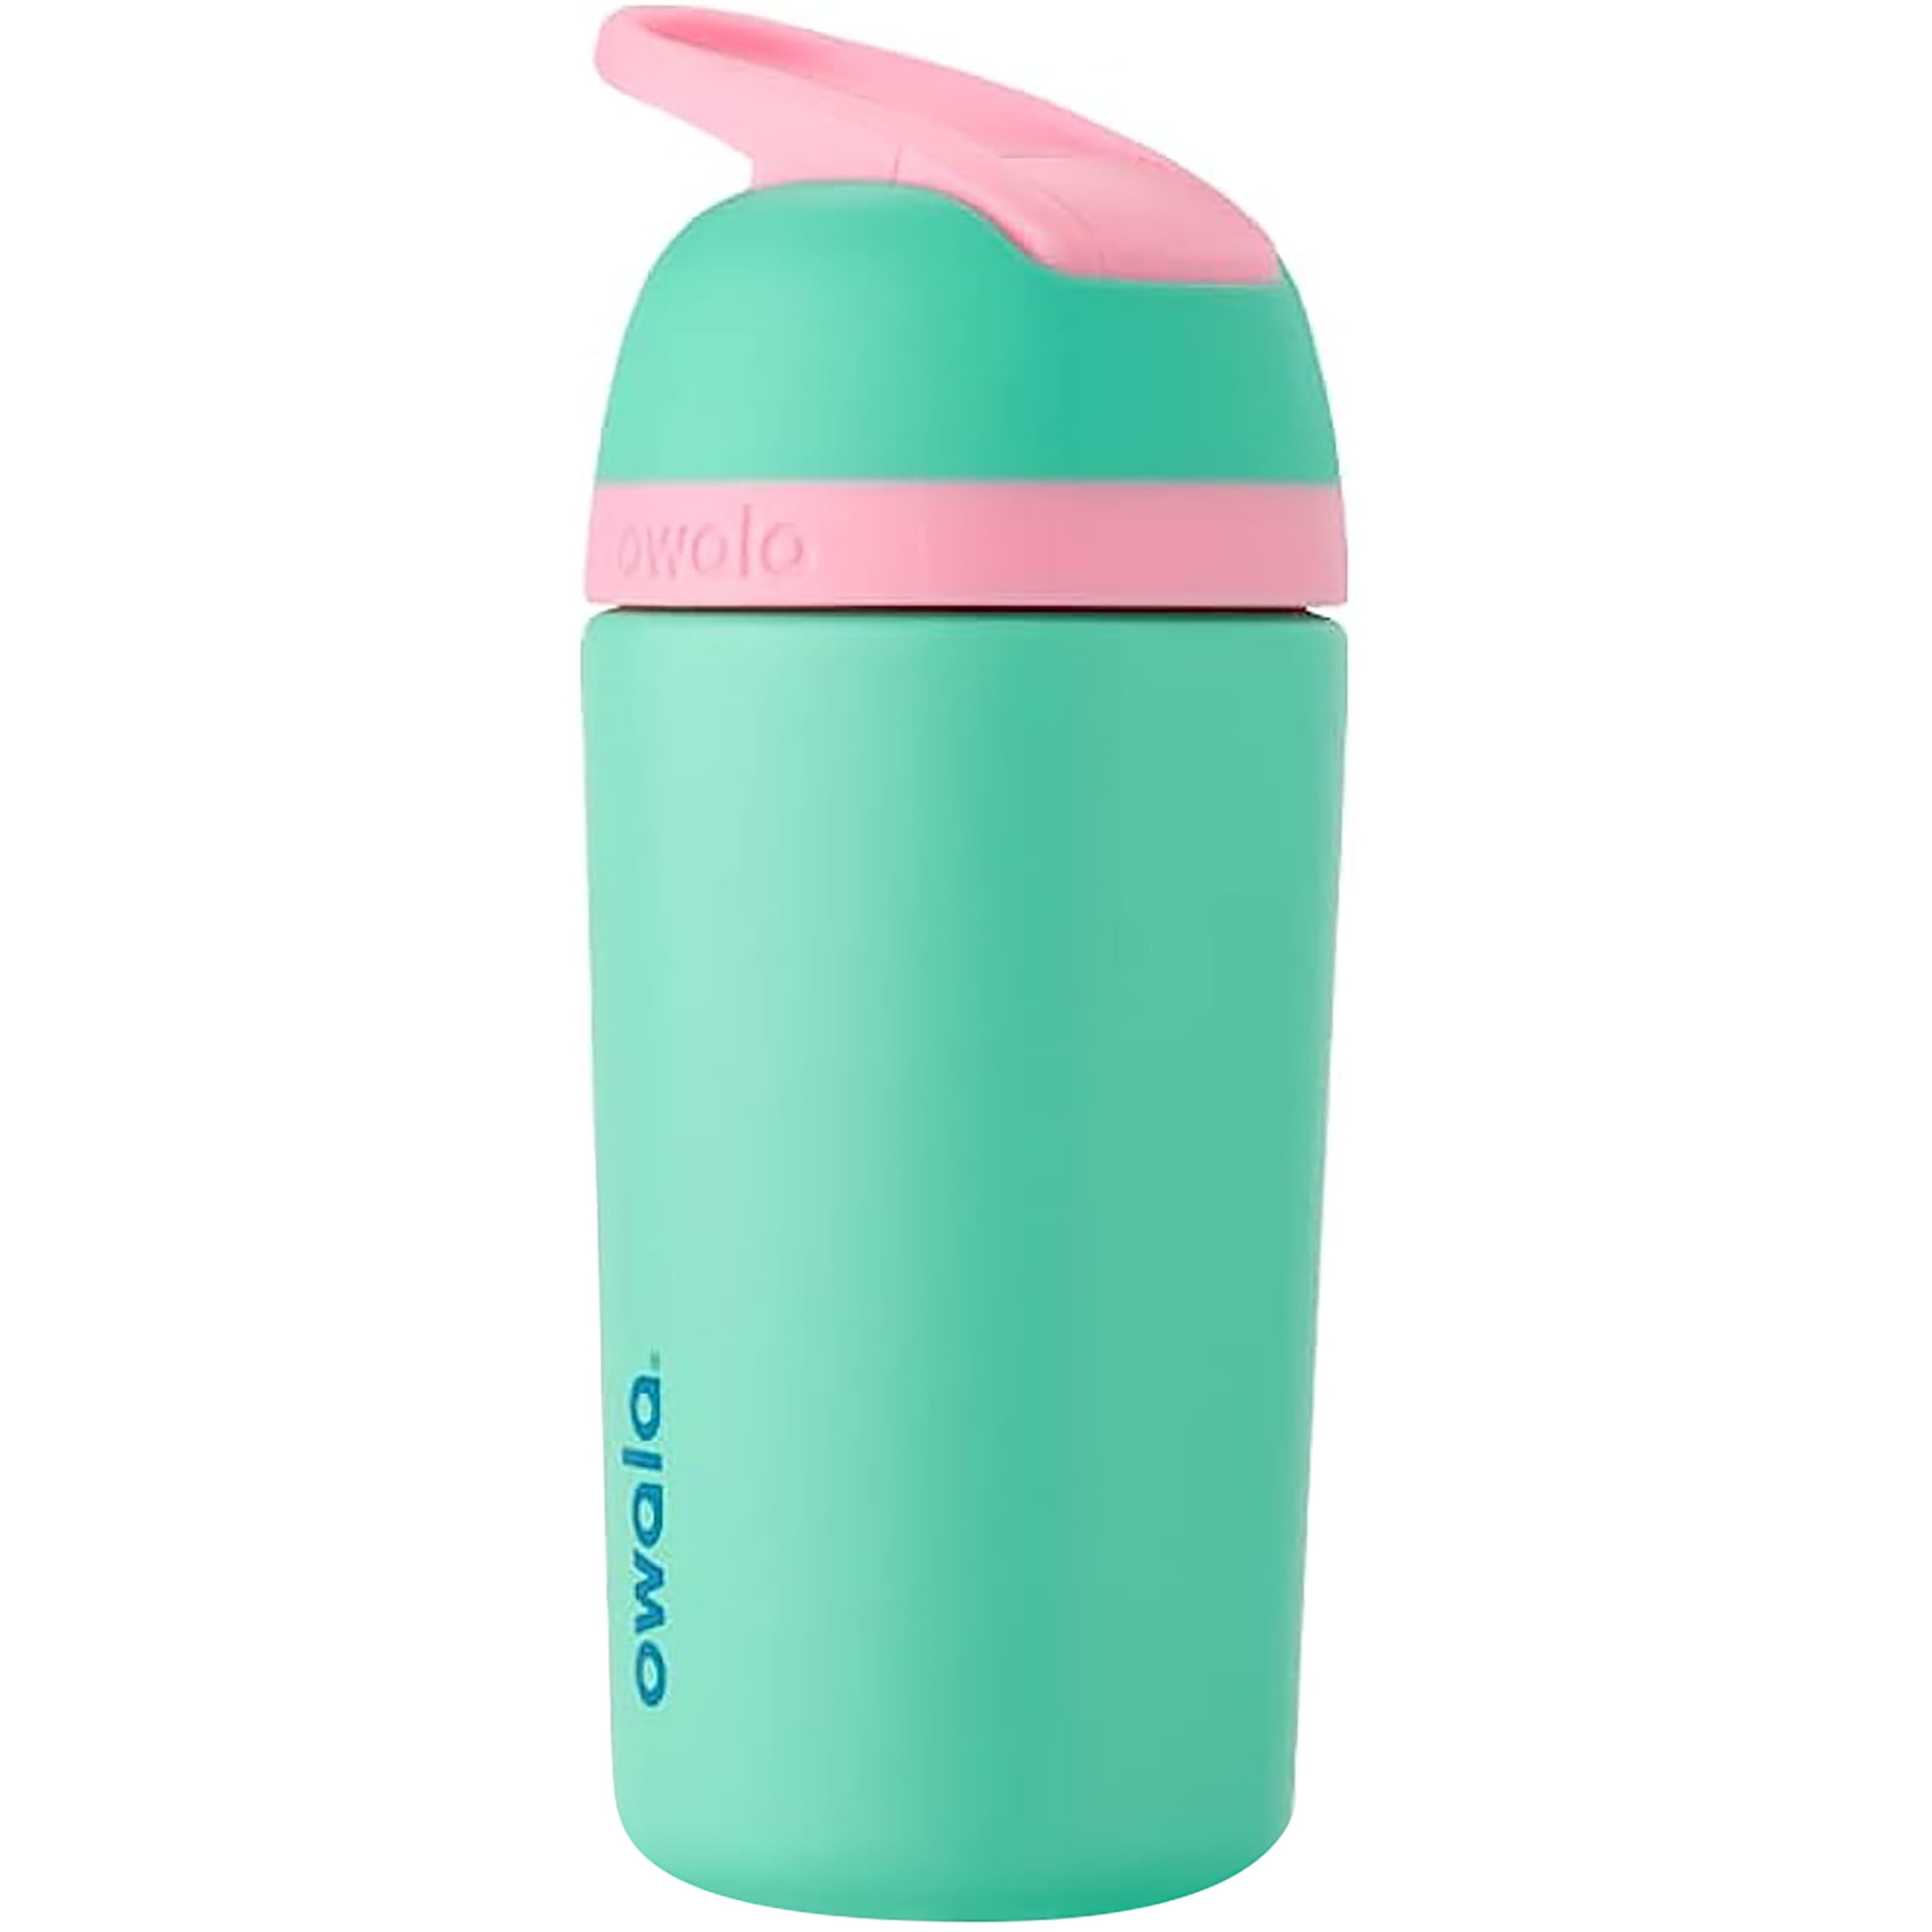 Owala Kids (Pink/Pink and Teal/Yellow) 14 Oz. Water Bottle Carry Loop With  Integrated Lock Hygienic Flip Straw Colored Straw Leak Proof Insulated